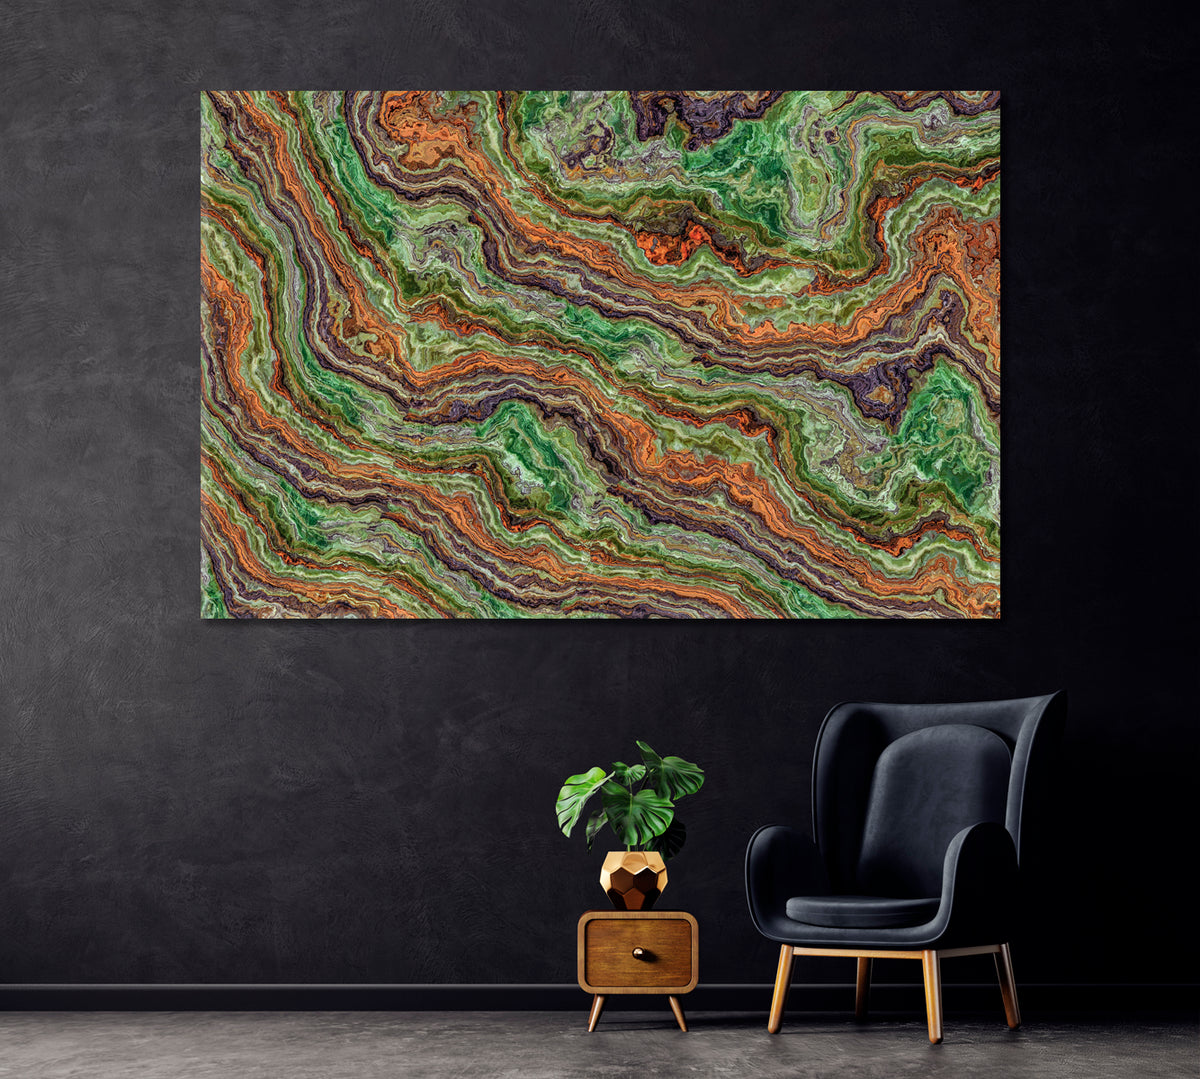 Green Onyx Abstract Pattern Canvas Print ArtLexy 1 Panel 24"x16" inches 